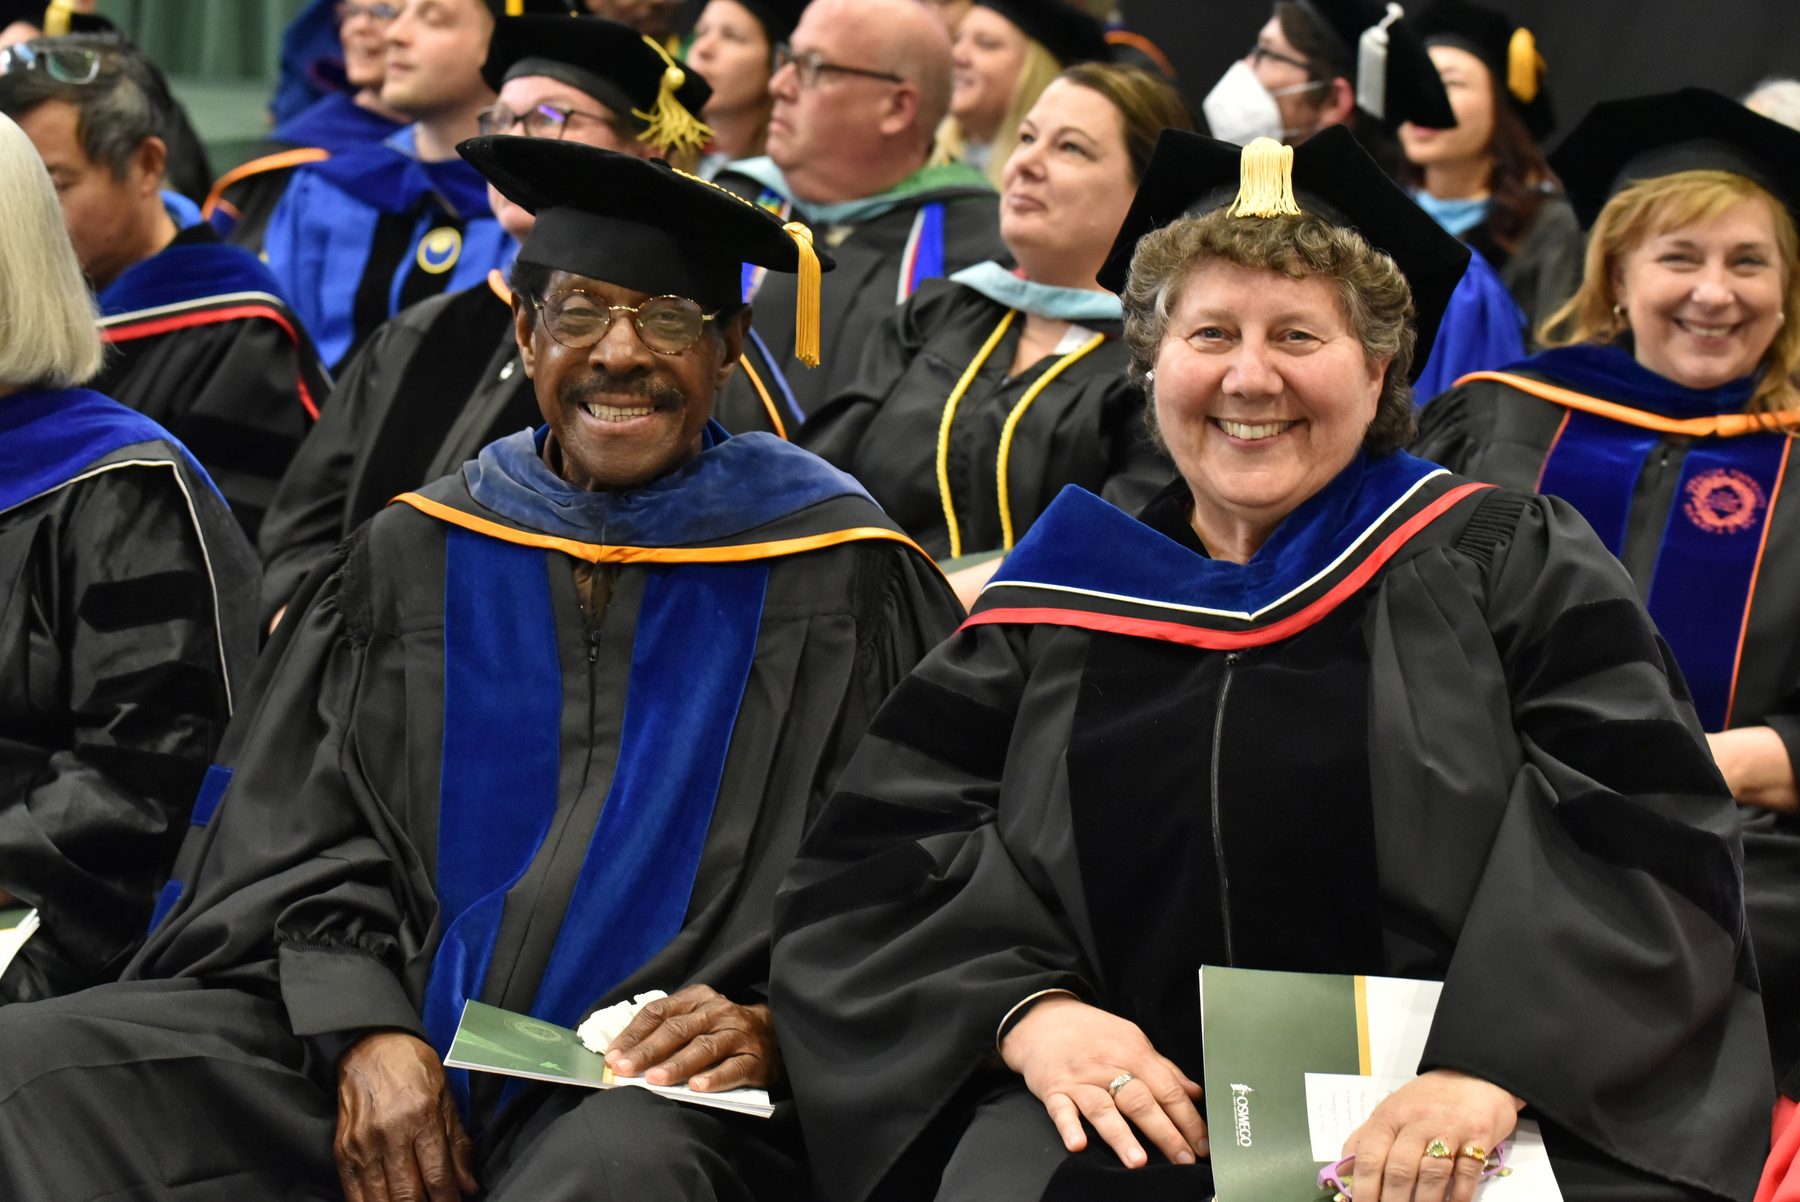 Retiring faculty were recognized during the 4 p.m. ceremony. Pictured are two influential School of Education faculty members: Distinguished Service Professor Alfred Frederick and professor Jean Ann.